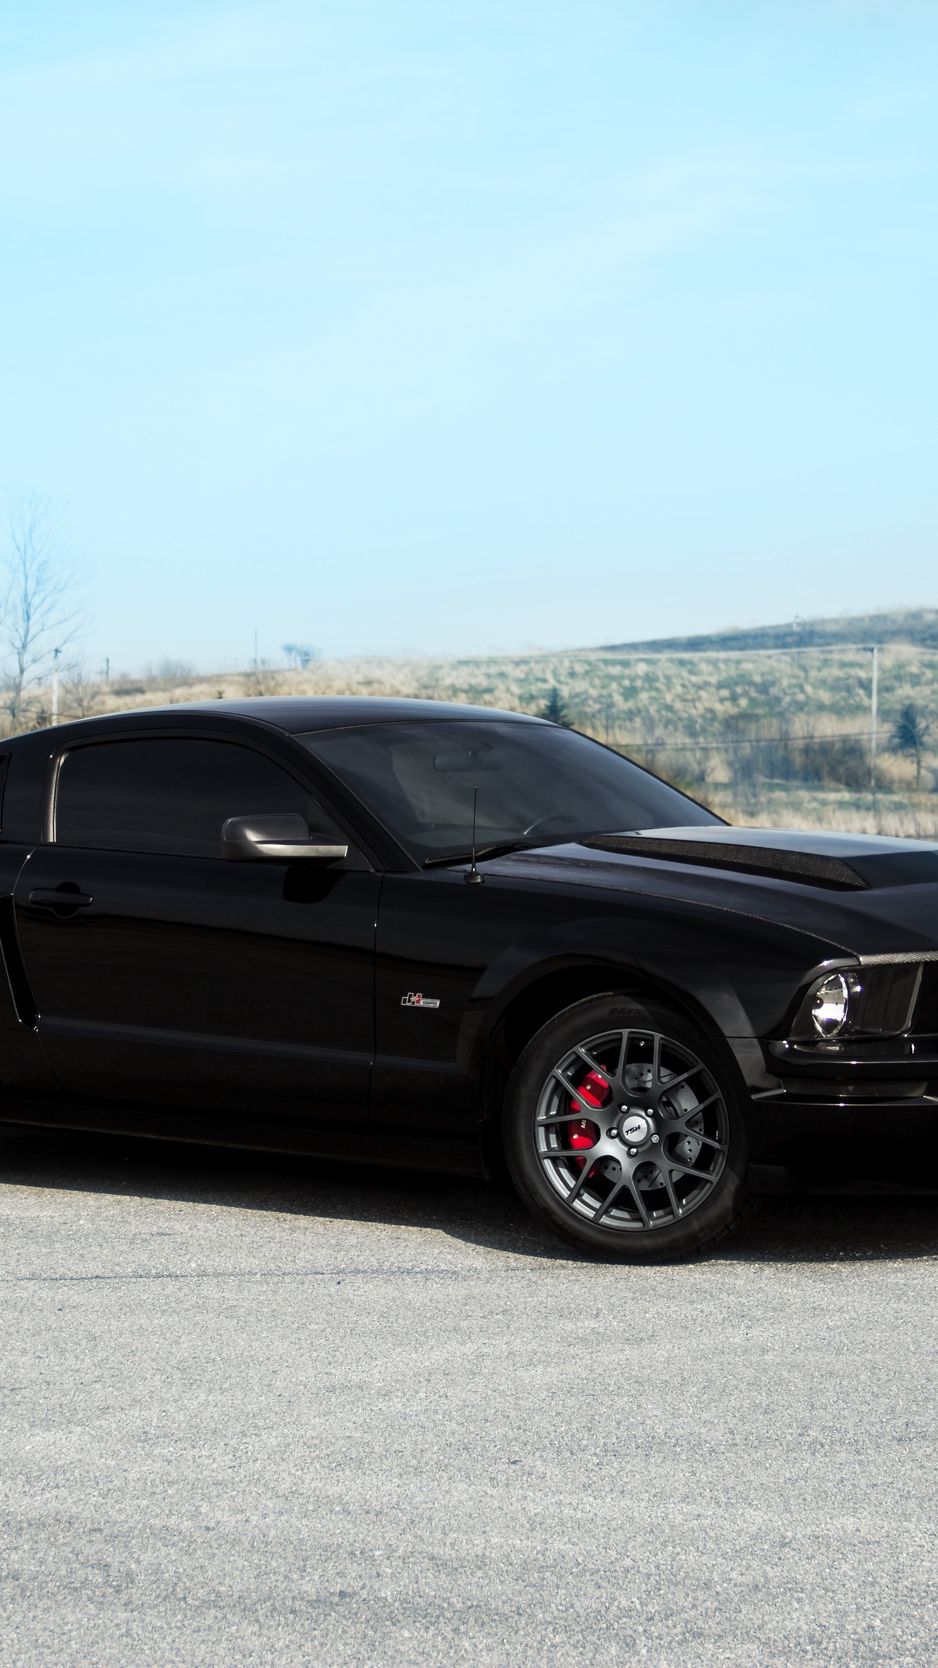 Download wallpaper 938x1668 ford mustang gt black landscape red iphone  876s6 for parallax hd background